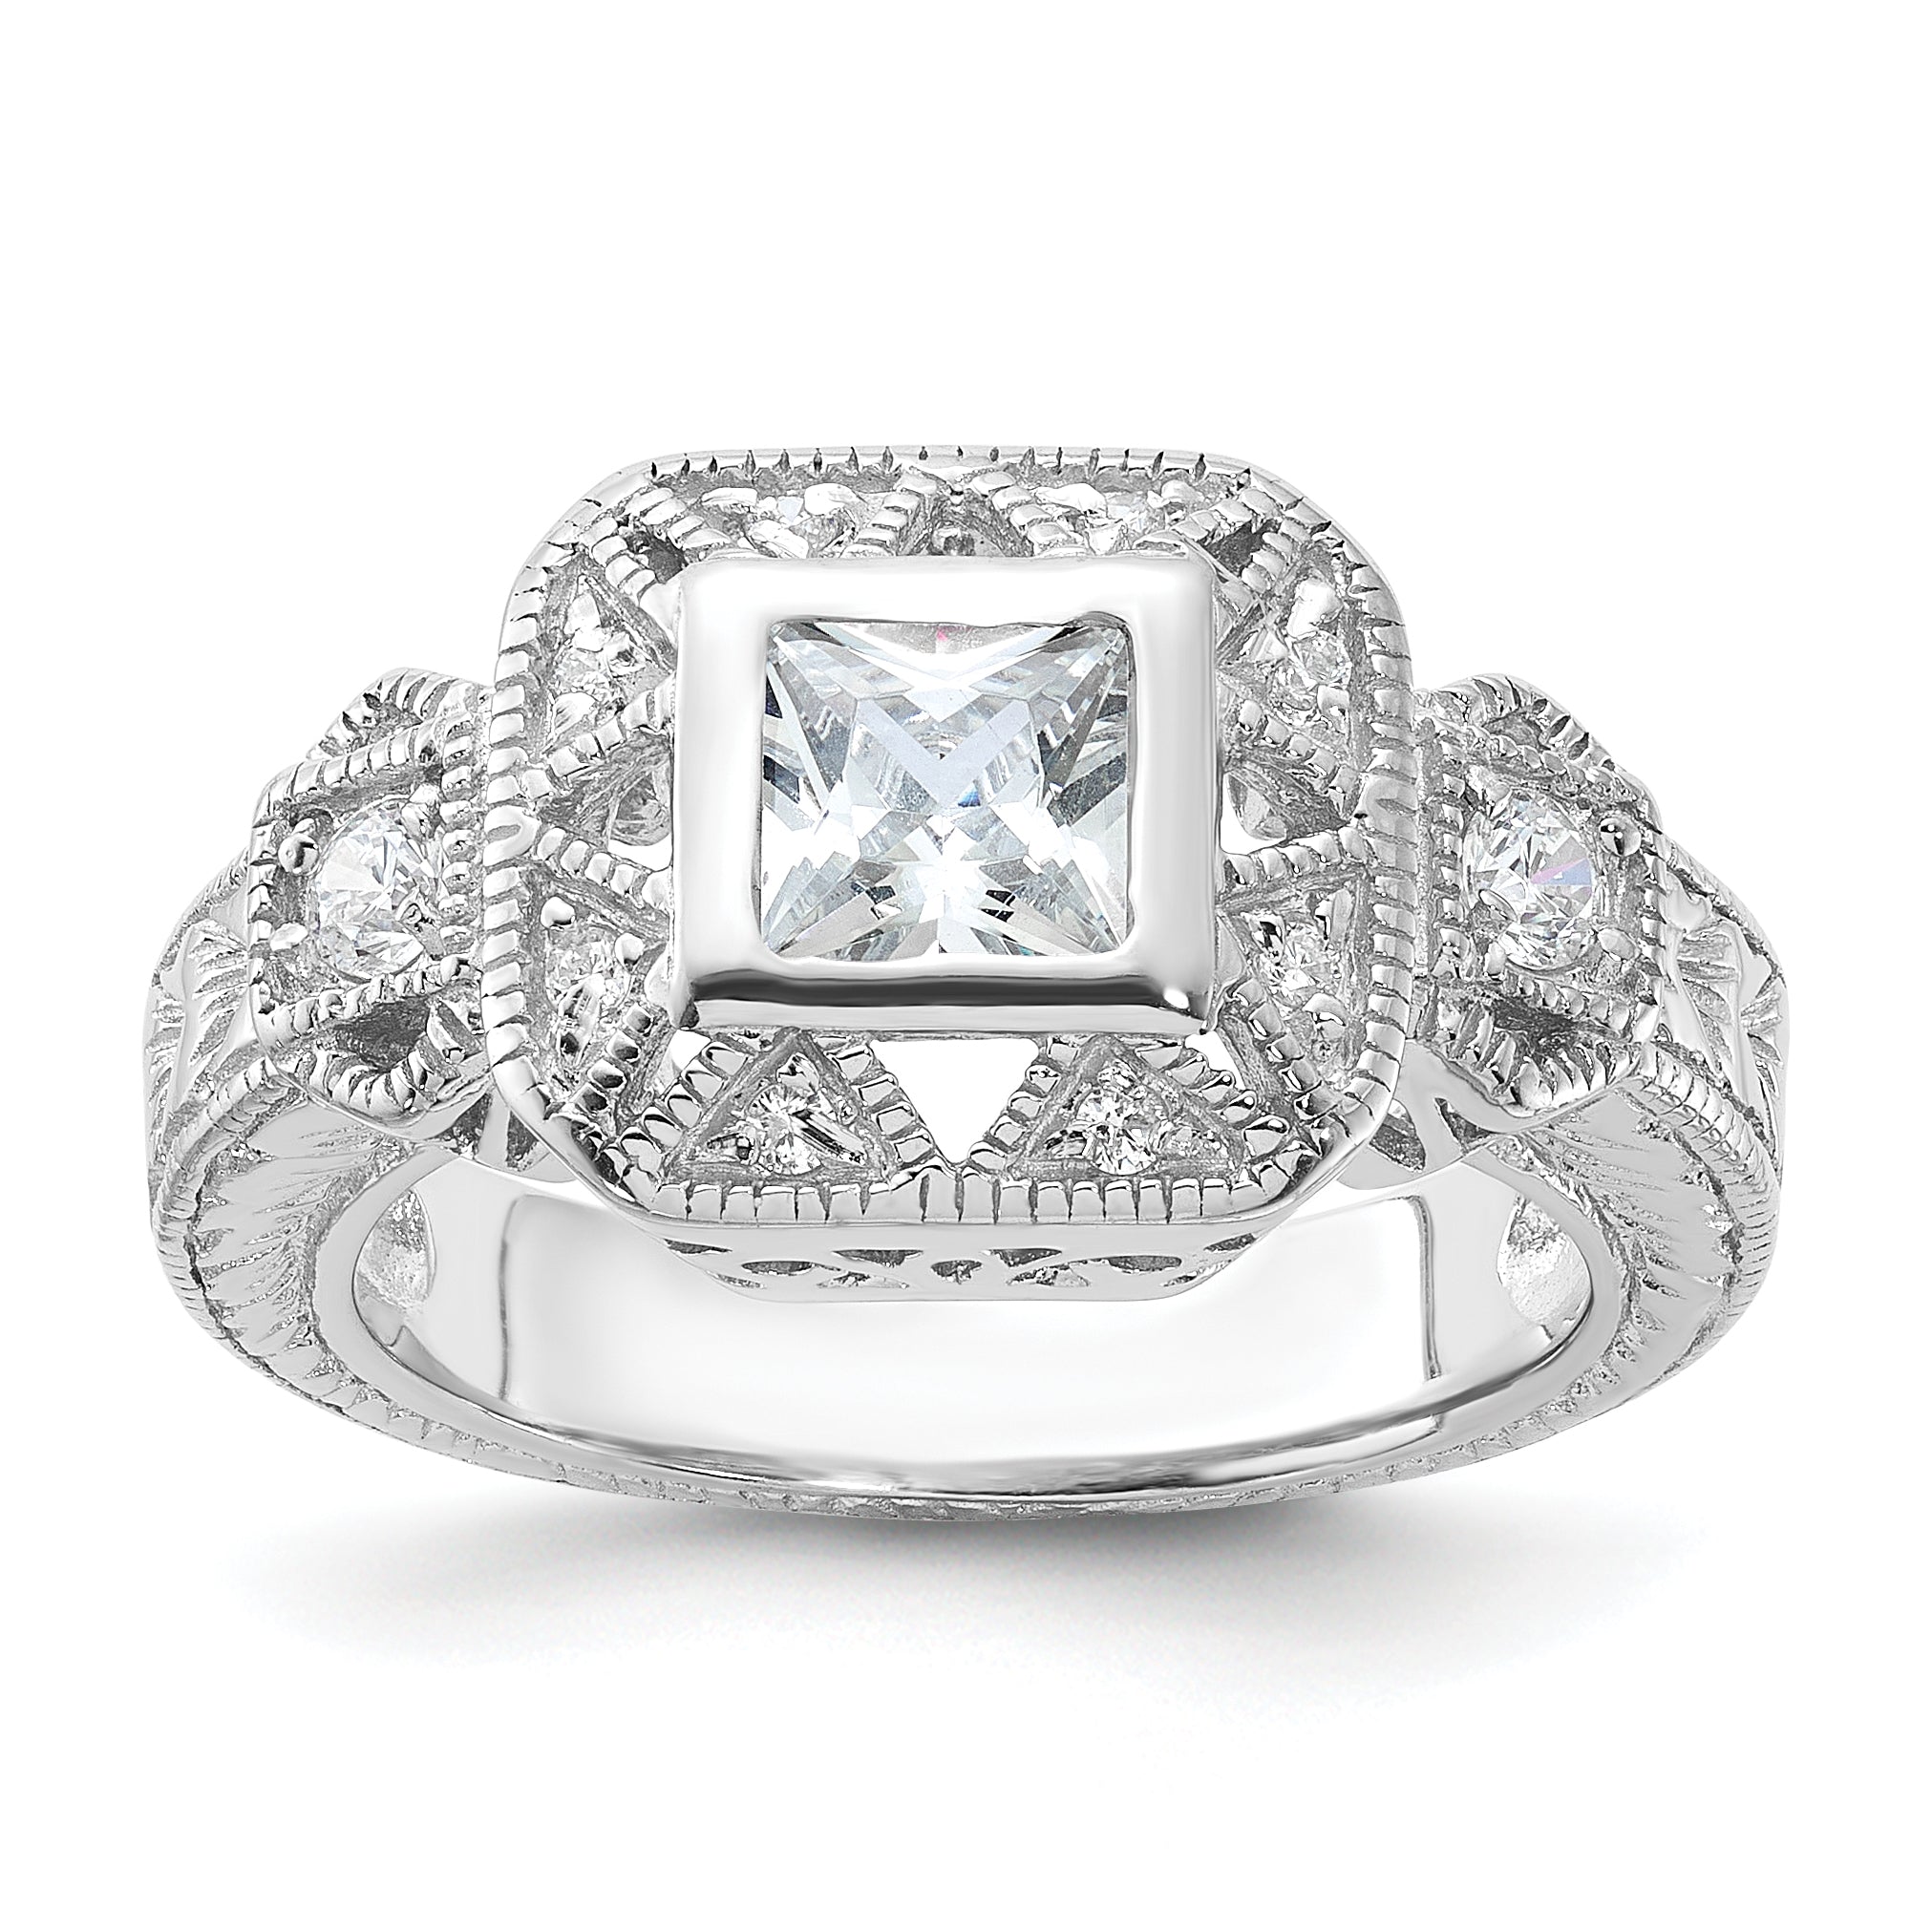 Sterling Silver Rhodium-plated CZ Antique Style Ring